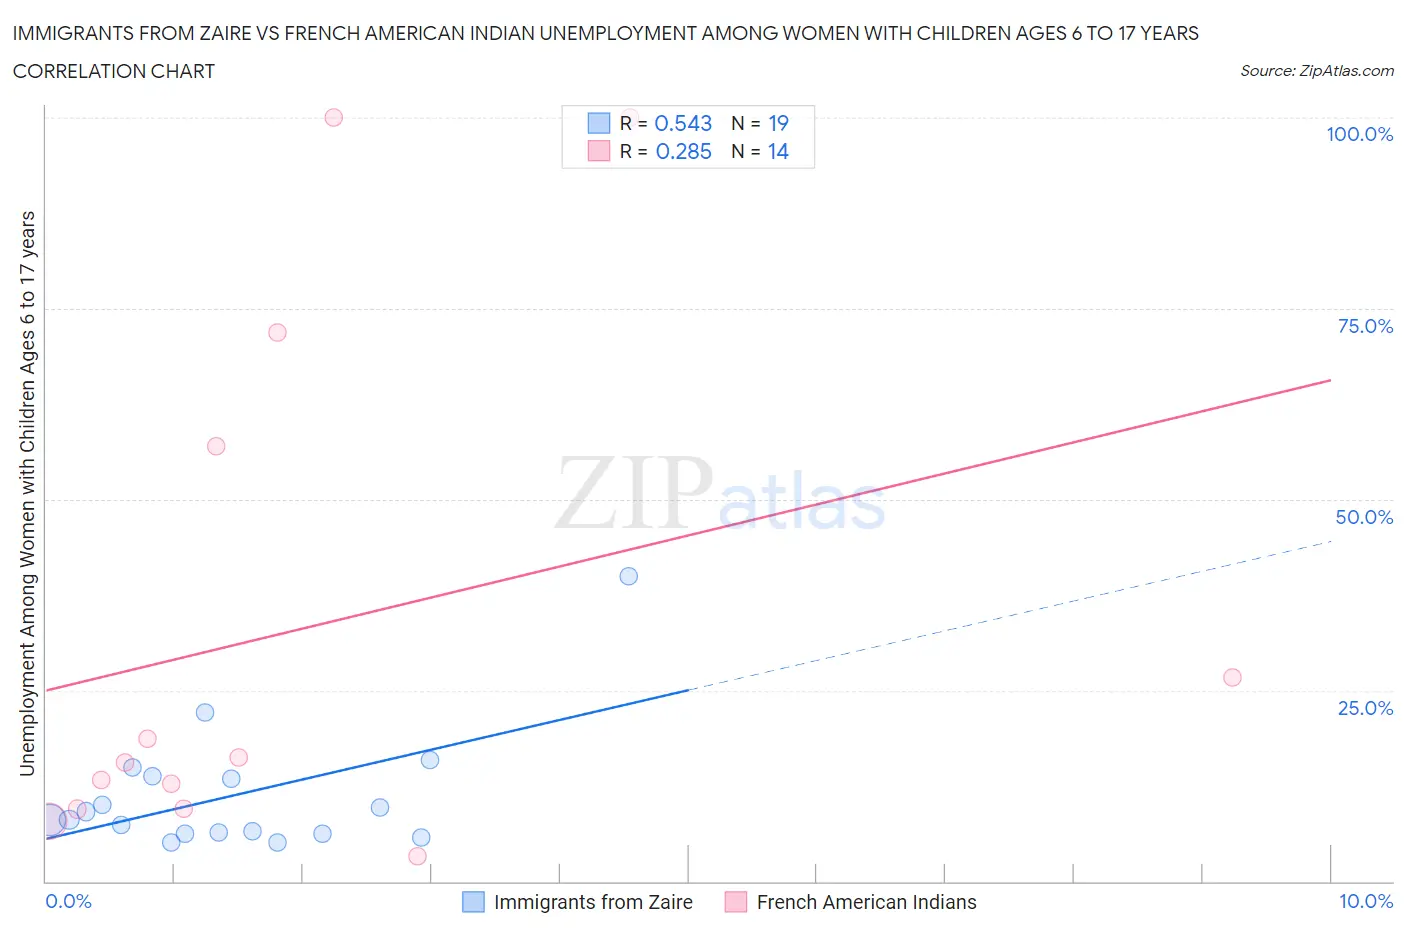 Immigrants from Zaire vs French American Indian Unemployment Among Women with Children Ages 6 to 17 years